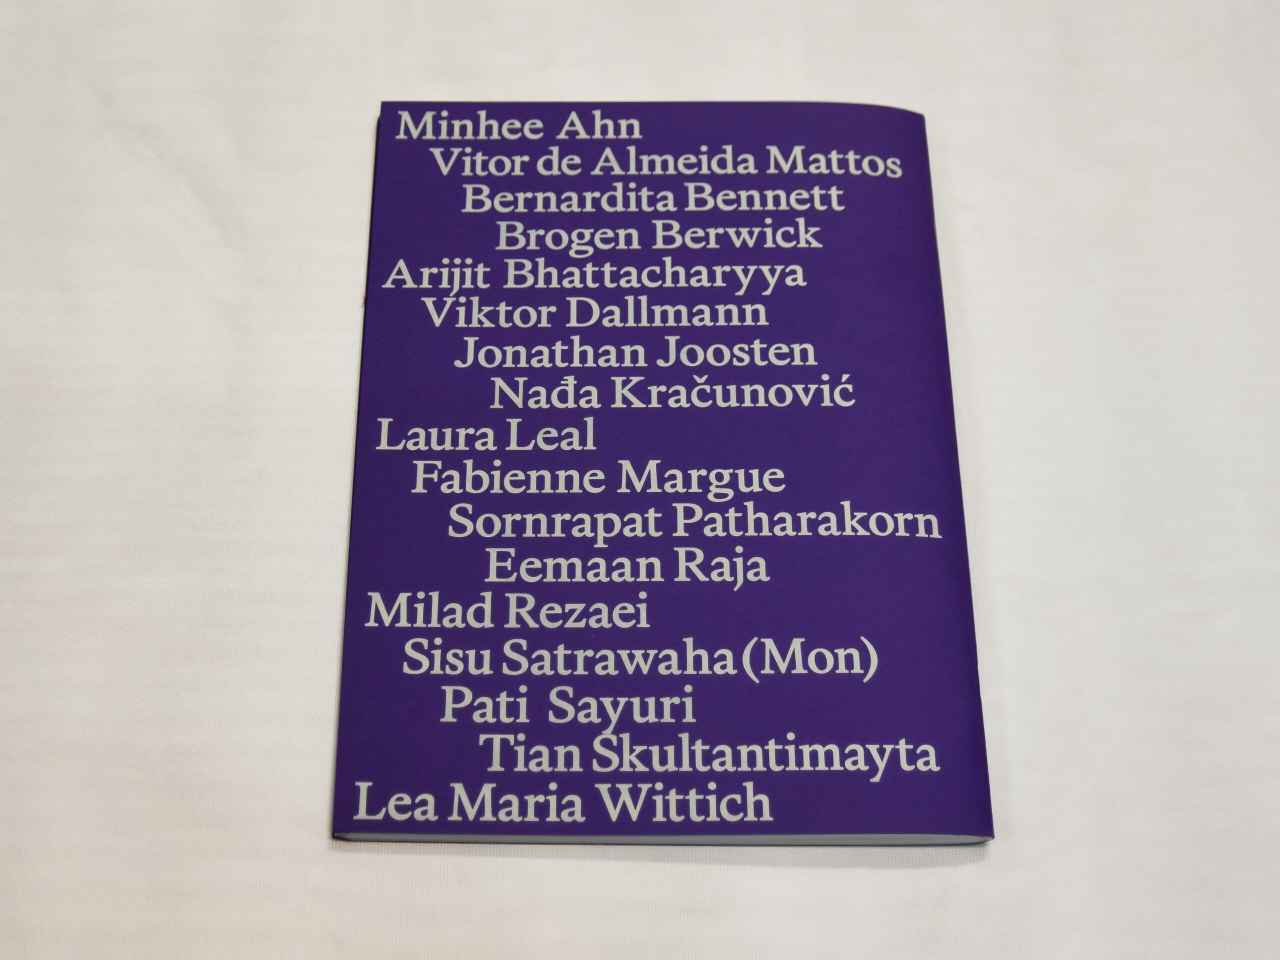 book cover design featuring the names of the participants